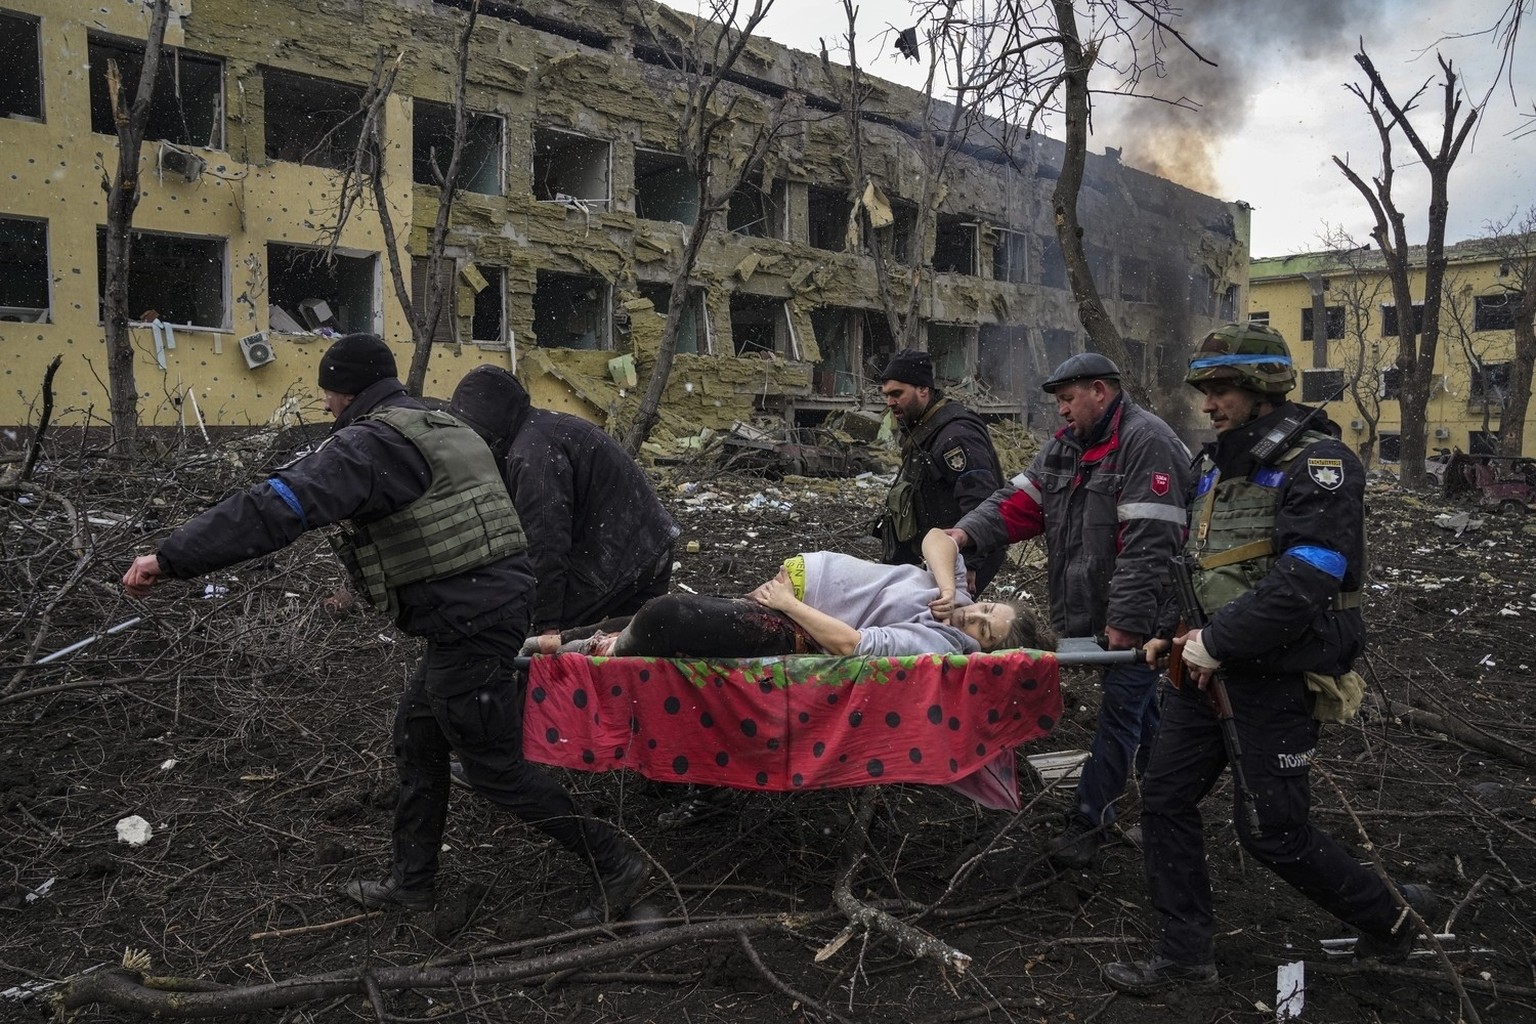 Ukrainian emergency workers and volunteers carry an injured pregnant woman from a maternity hospital damaged by an airstrike in Mariupol, Ukraine, on March 9, 2022. The image appears in a scene from t ...